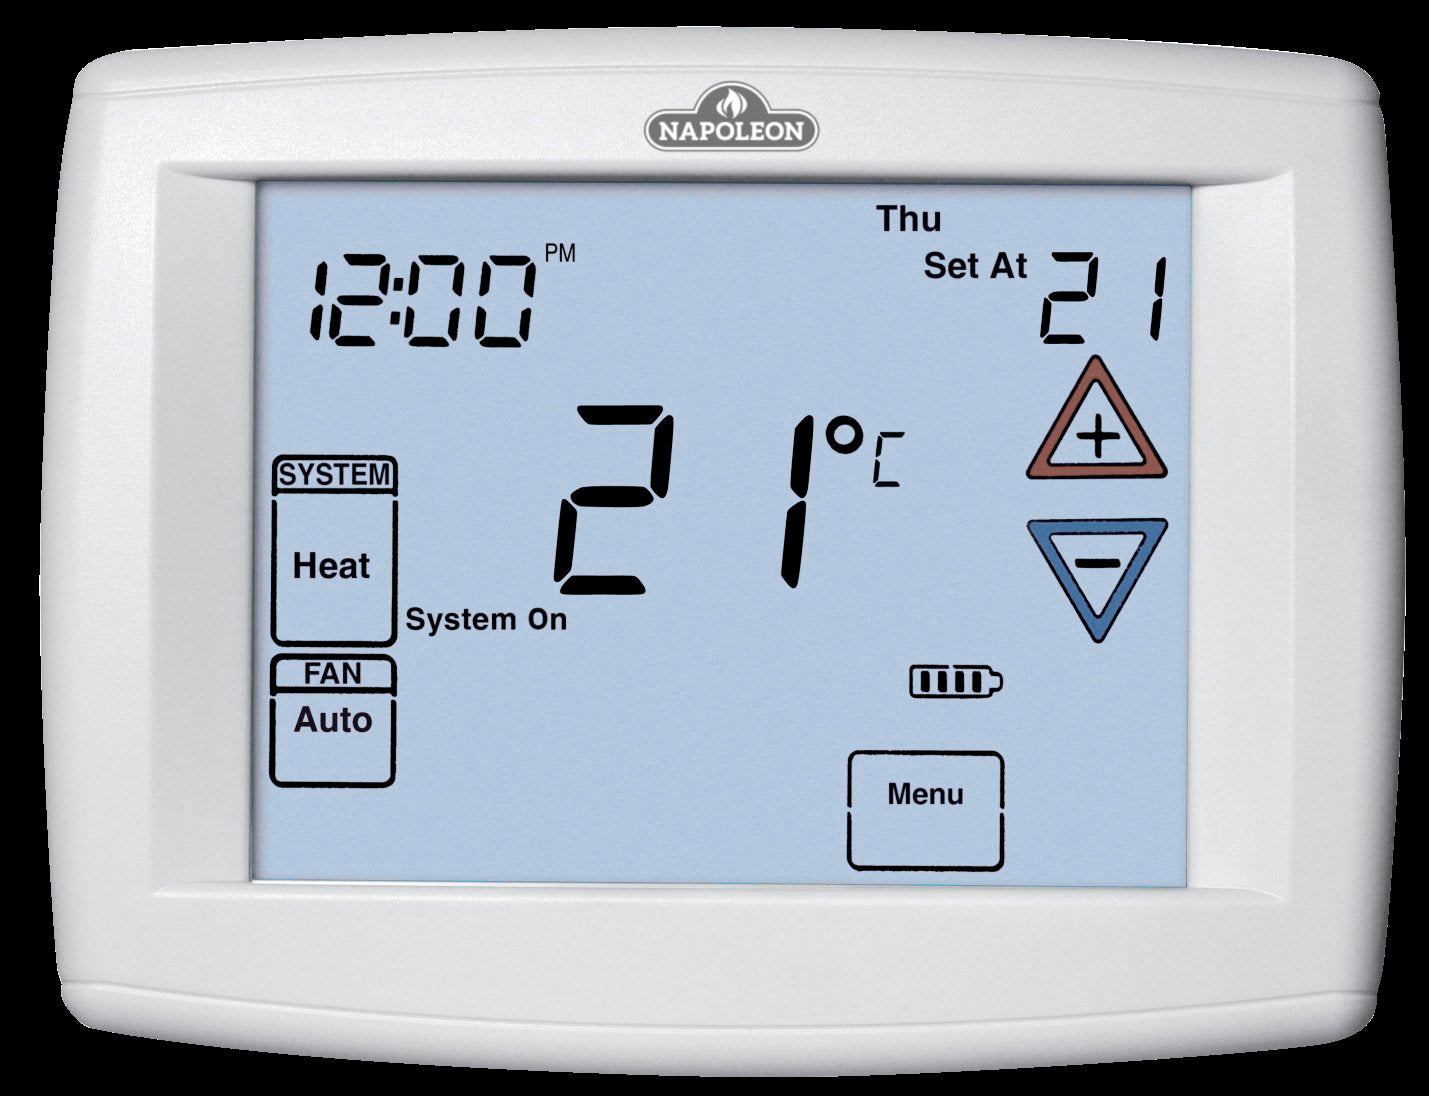 Napoleon 3H/2C 7-day Programmable Thermostat - 12 sq.in. Touchscreen